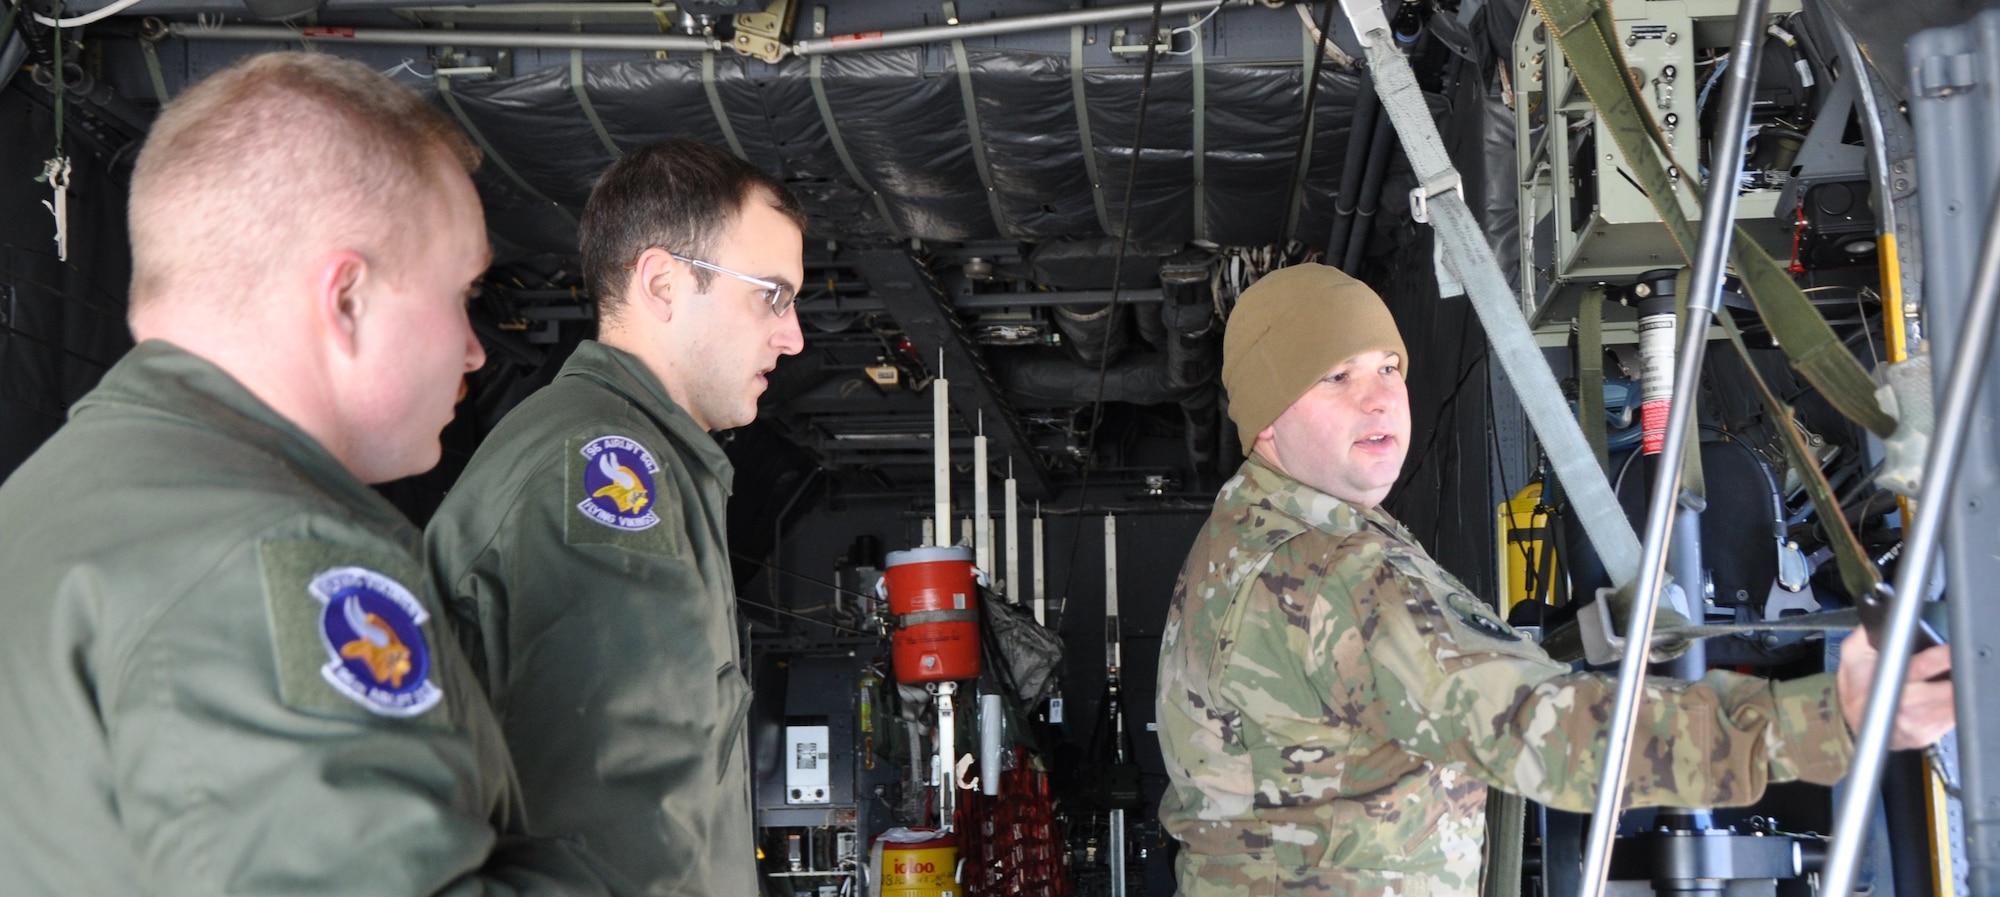 Tech. Sgt. Michael Hoffman, right, a C-130H loadmaster with the 700th Airlift Squadron, Dobbins, Air Reserve Base, Georgia, teaches Senior Airmen Erik Hannigan, left, and Kevin Pajor, C-130 loadmasters from the 96th Airlift Squadron, Minneapolis-St. Paul Air Reserve Station, Minnesota, about the towed parachute retrieval system during the loadmaster refresher course, Nov. 18 at Peterson Air Force Base, Colorado. About 70 loadmasters attended the training hosted by the 302nd Airlift Wing. (U.S. Air Force photo/Daniel Butterfield)